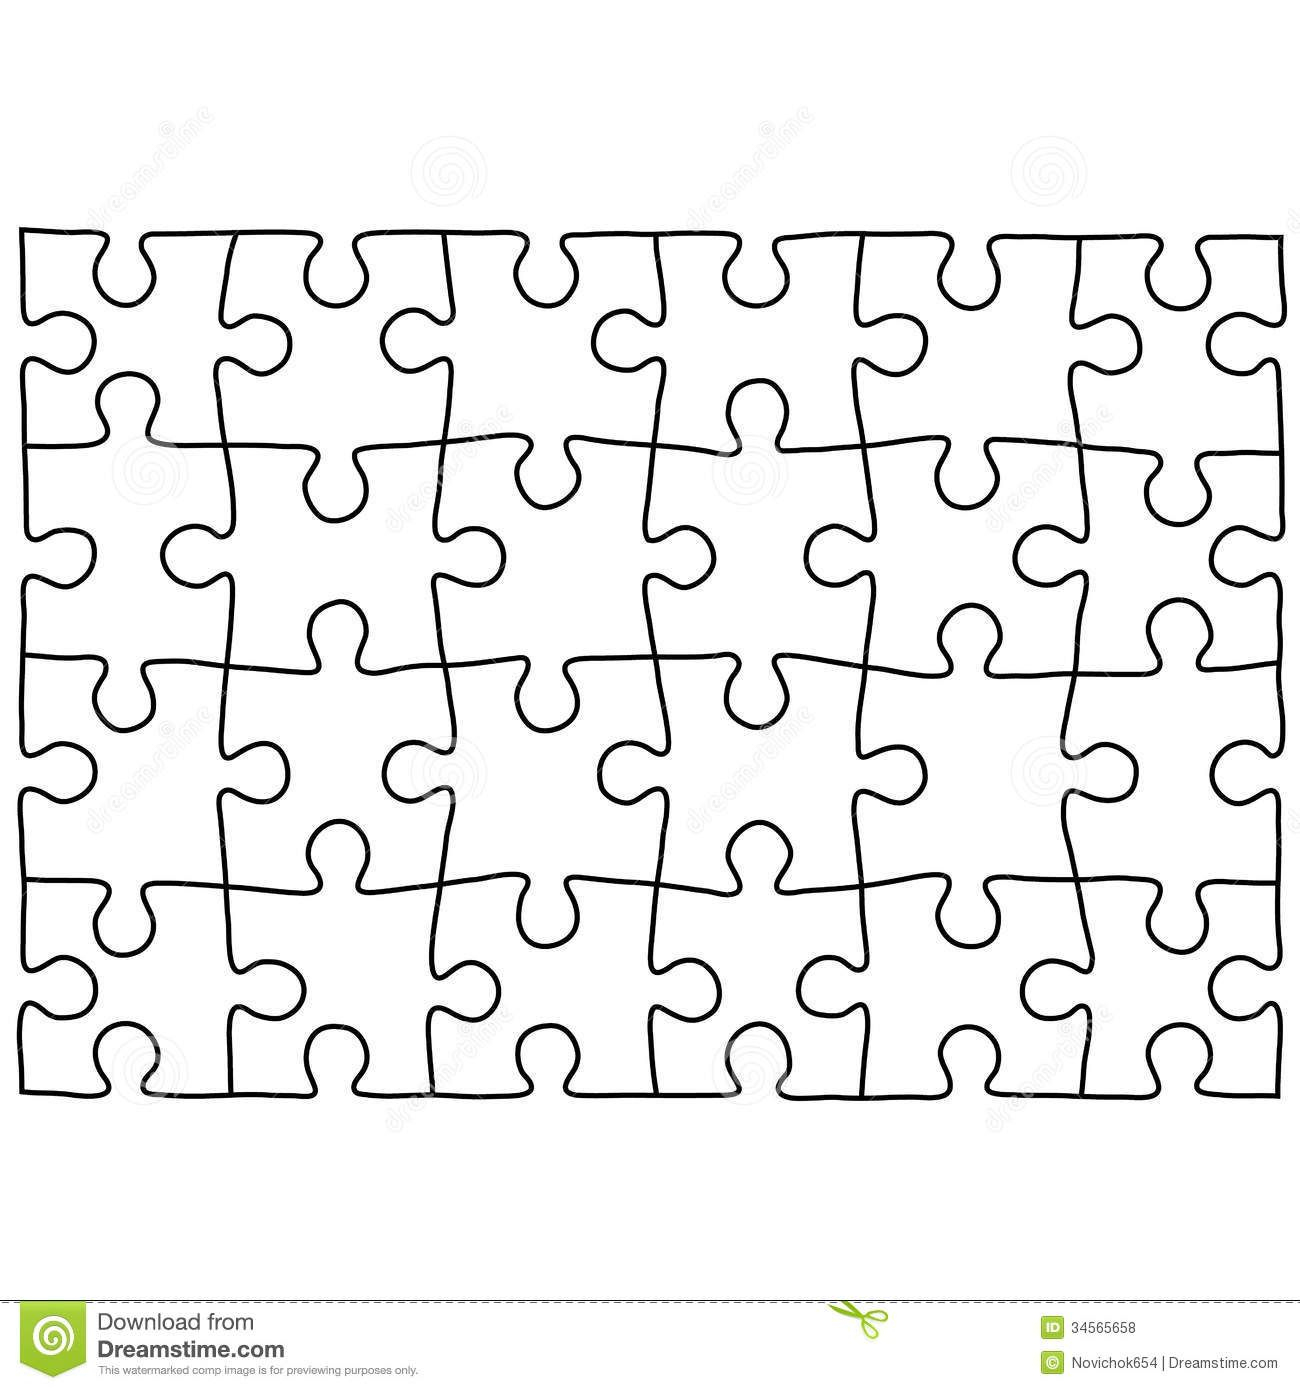 Jigsaw Puzzle Design Template | Free Puzzle Templates 1300.1390 - Printable Jigsaw Puzzle Maker